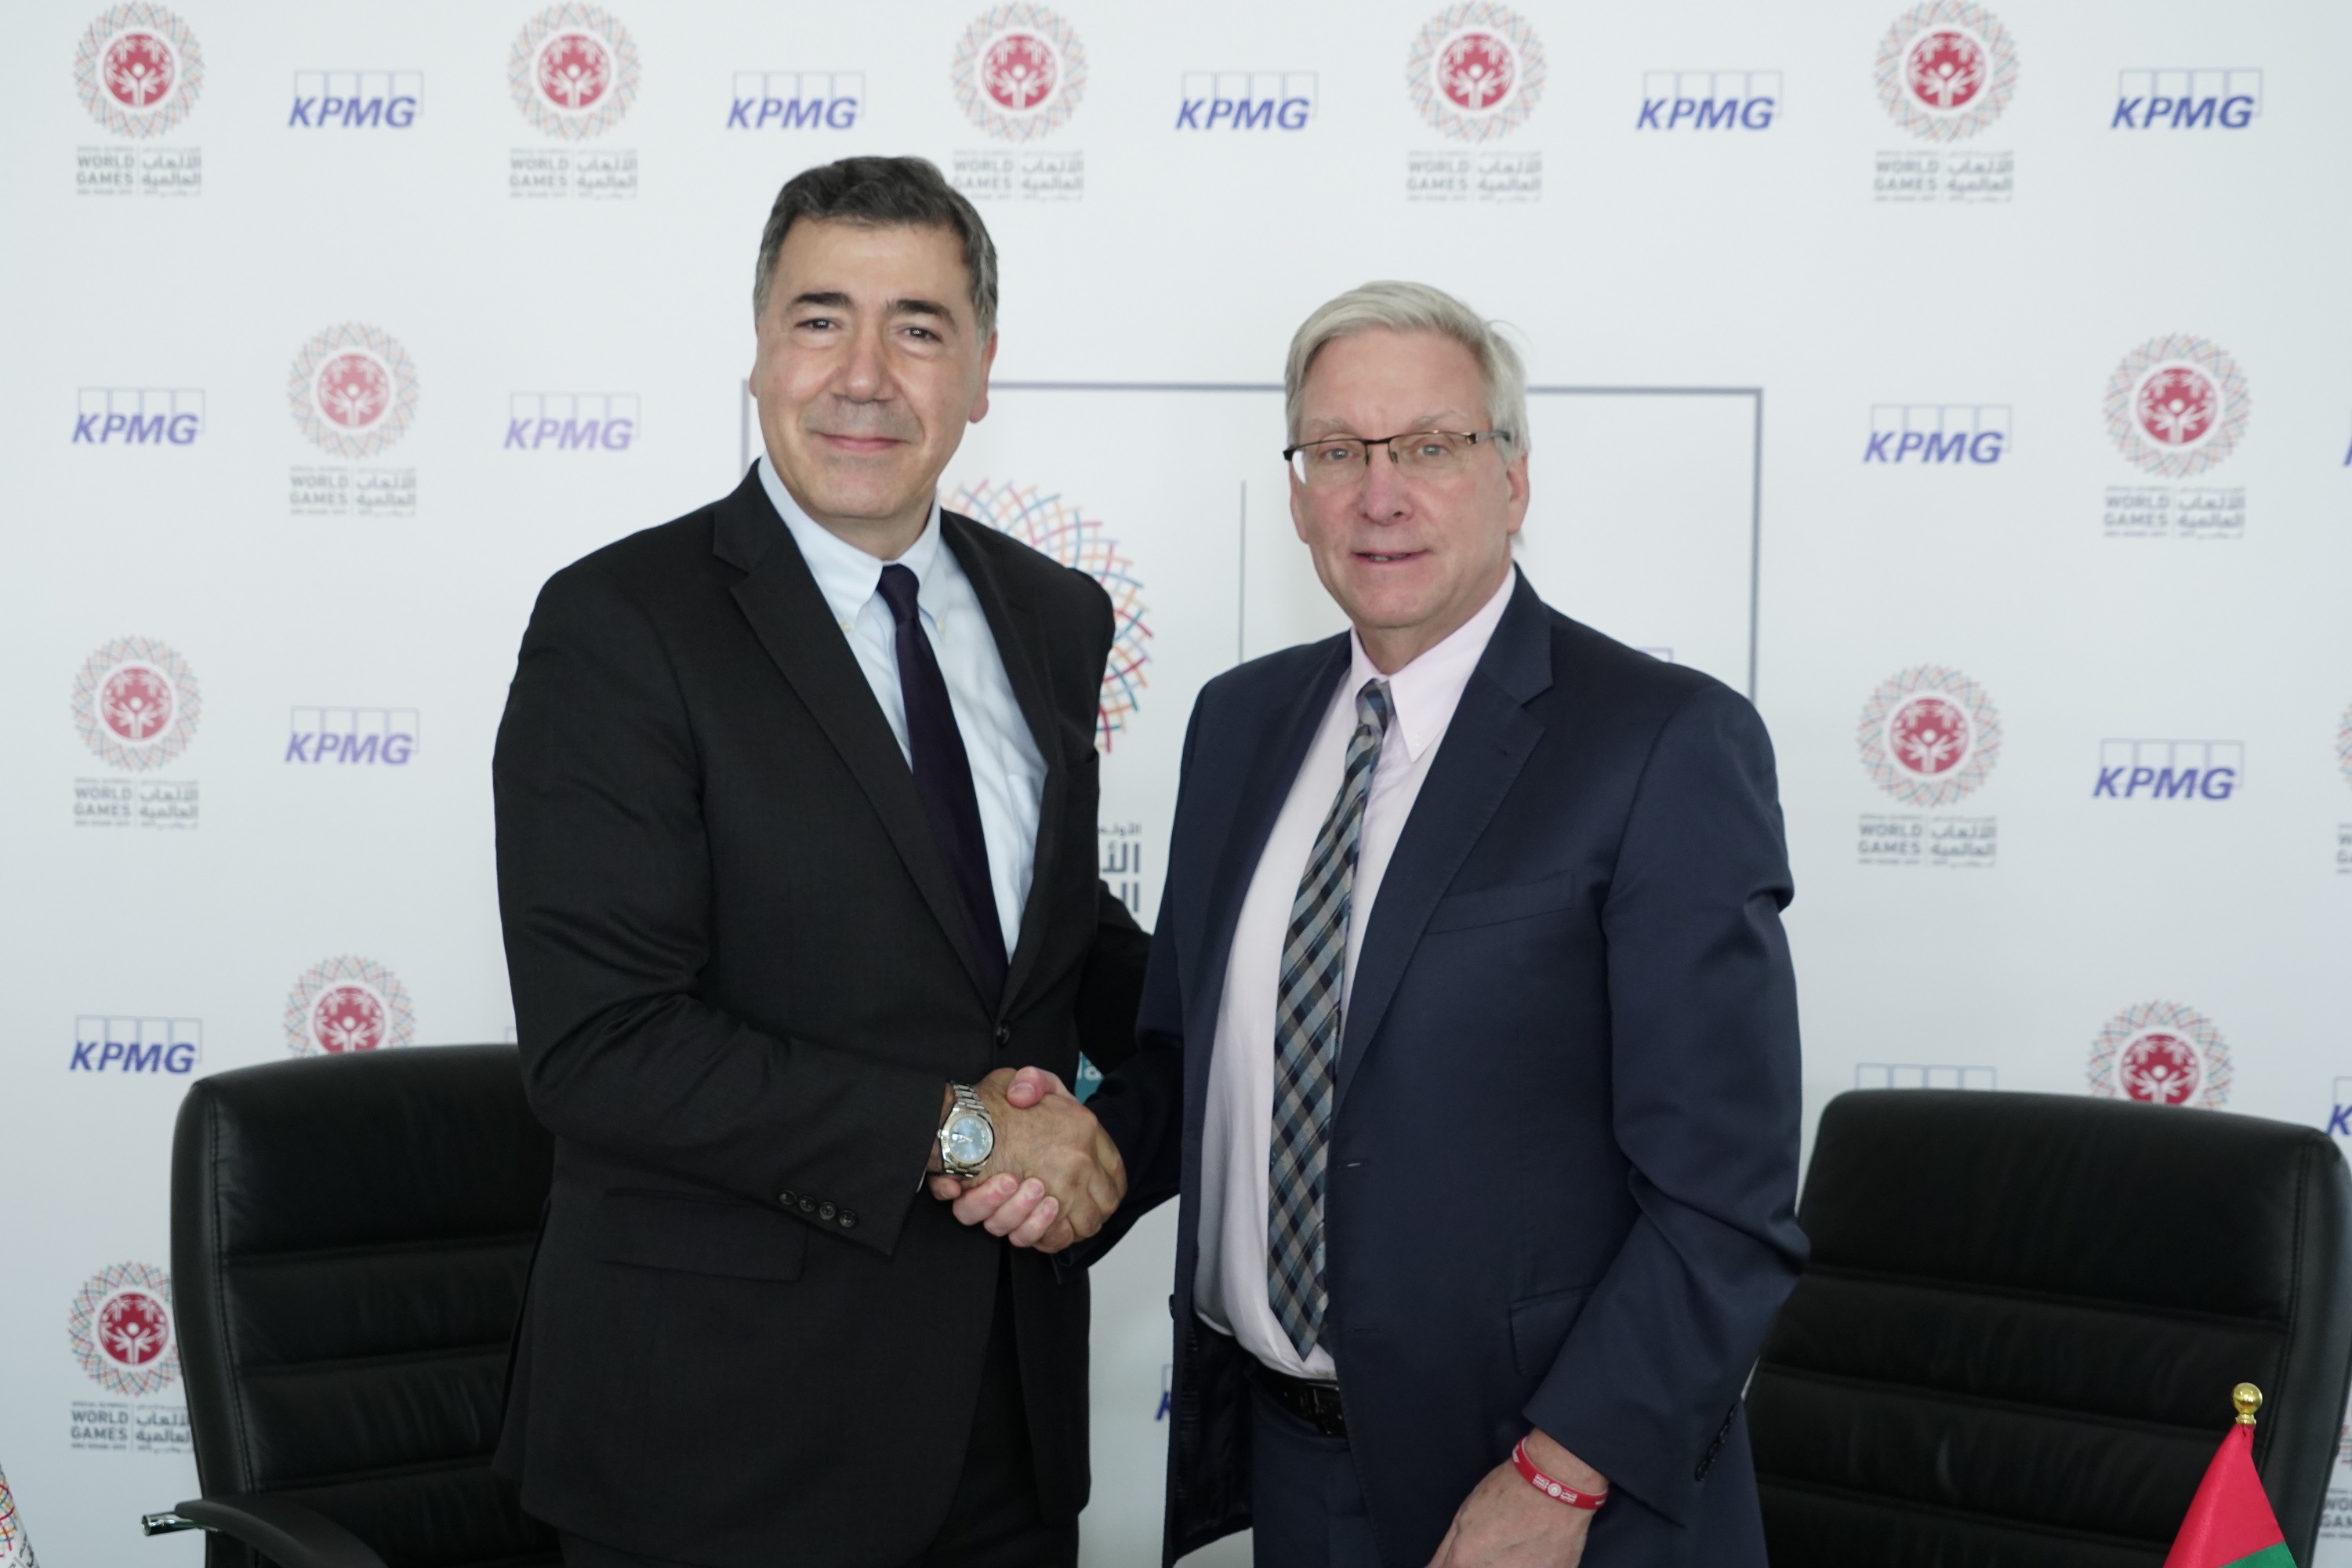 KPMG to be an Official Supplier for Special Olympics World Games Abu Dhabi 2019 and Sponsor of Global Youth Leadership Summit